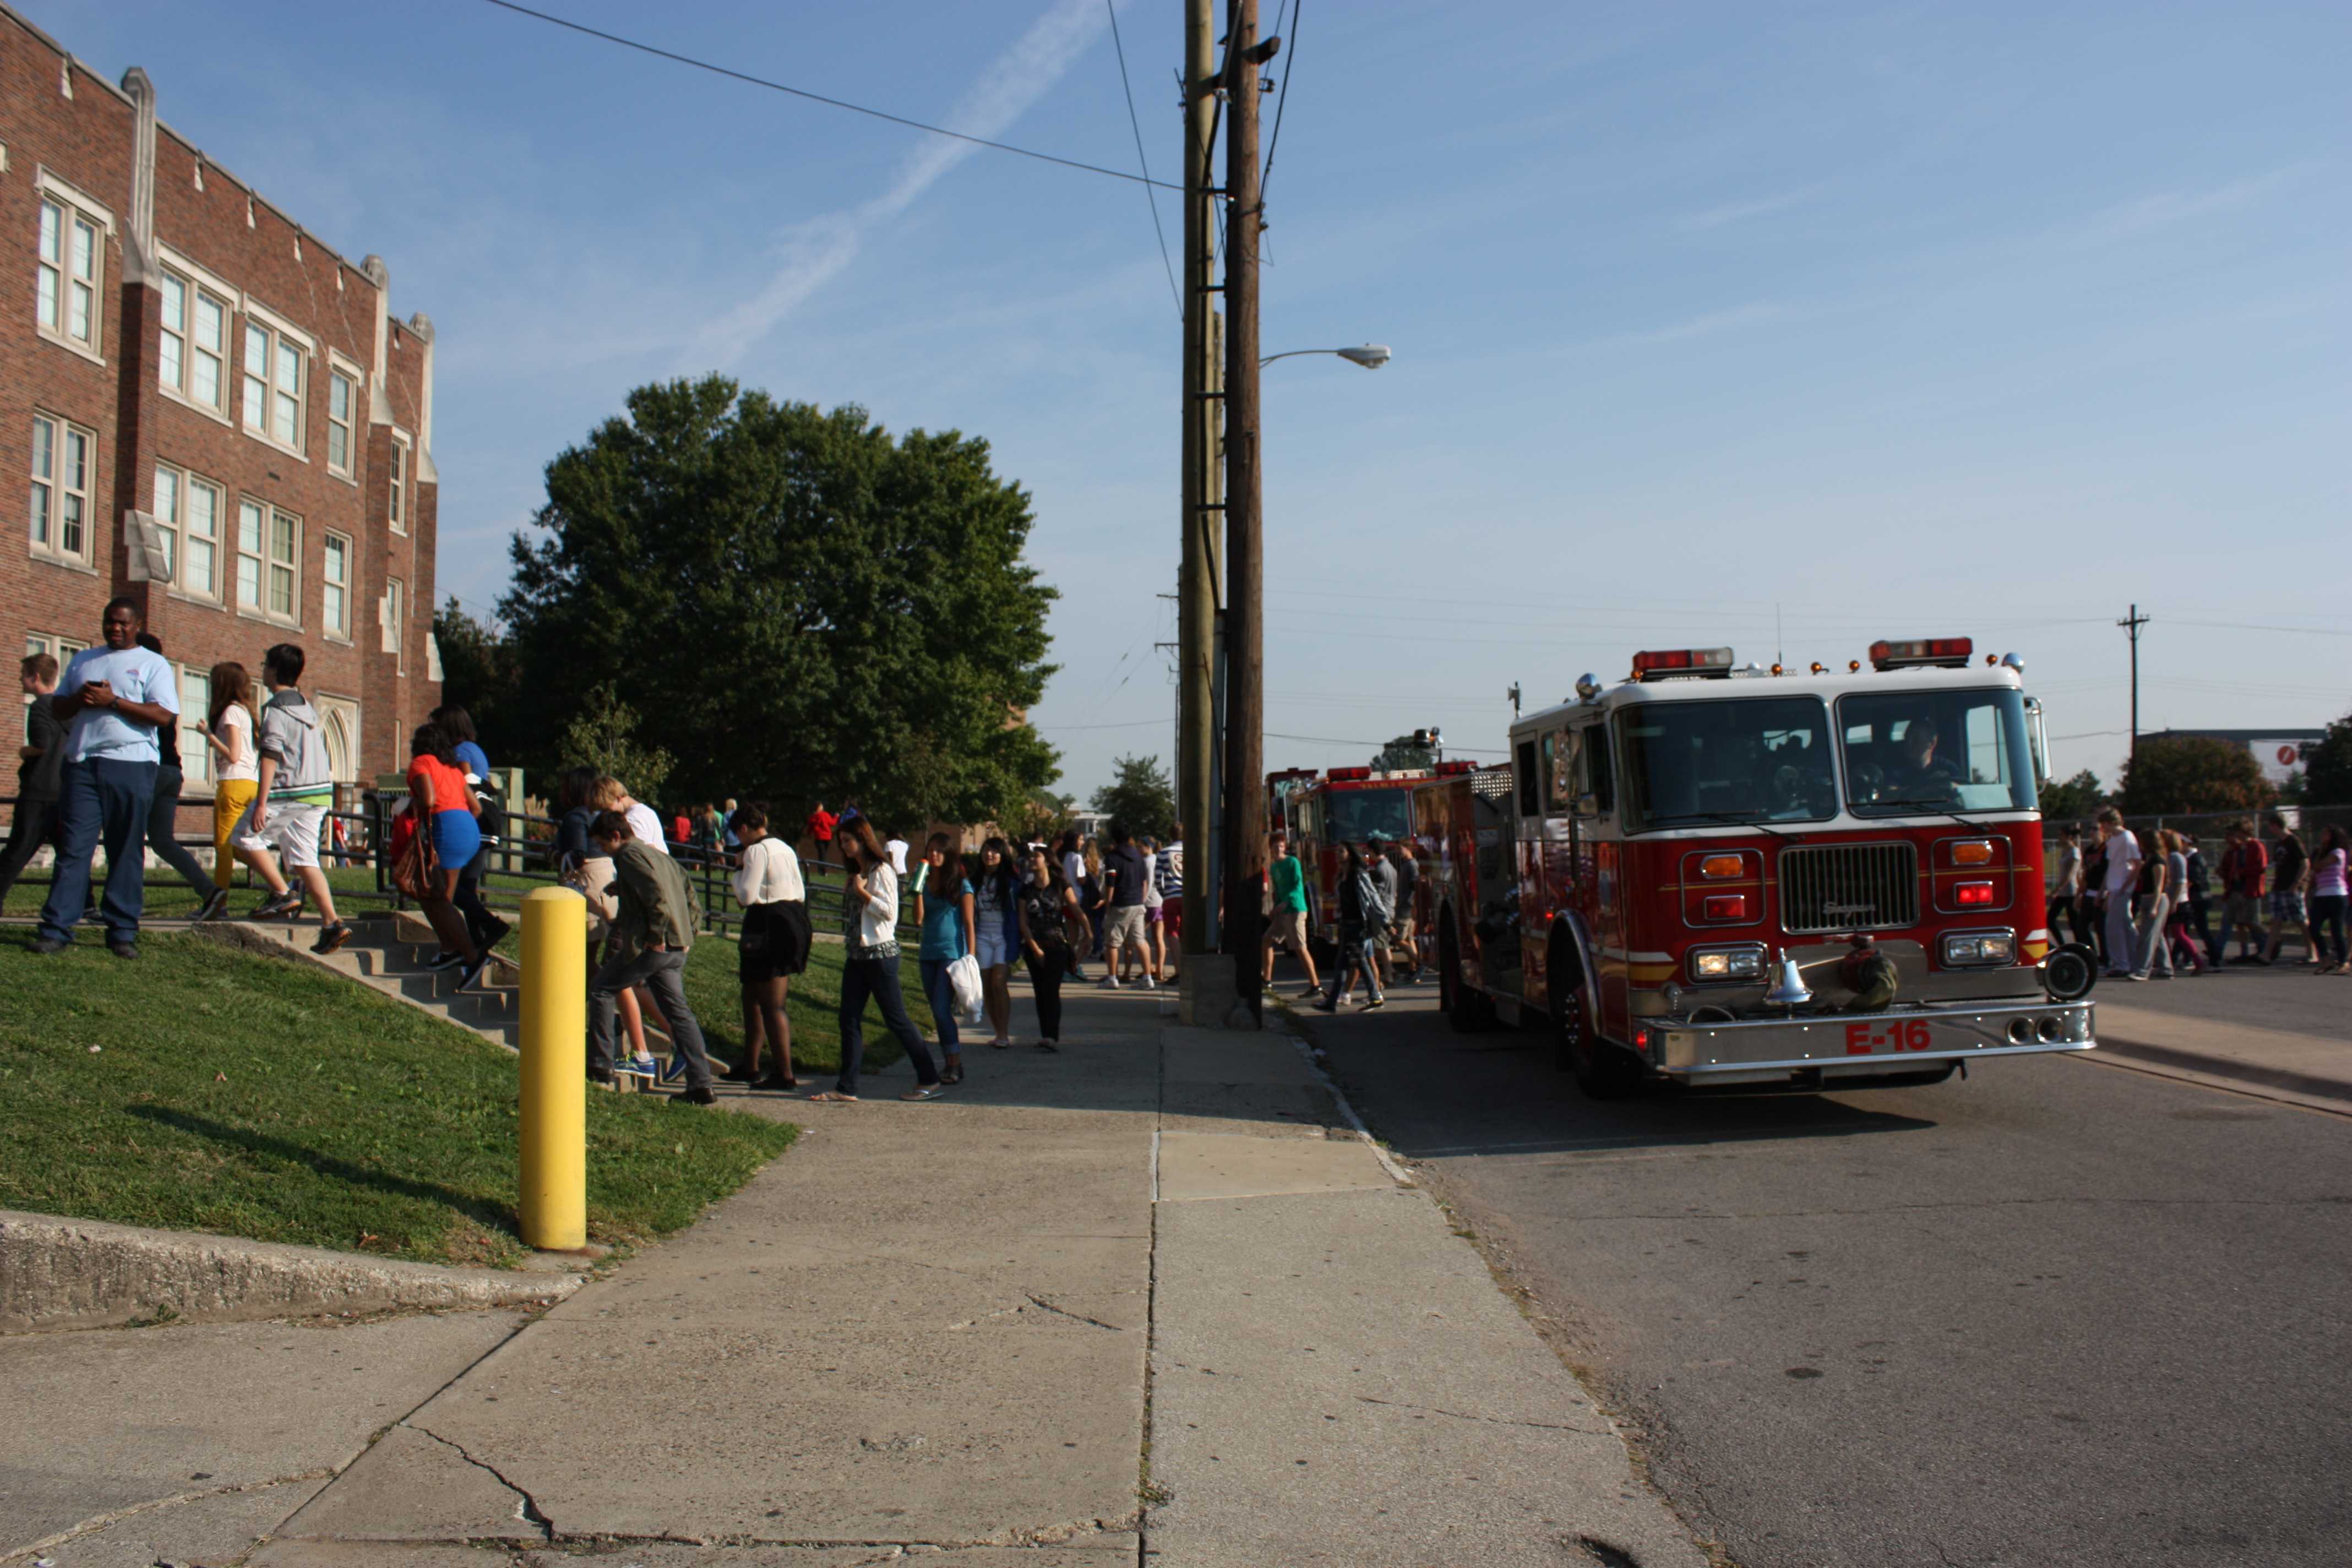 Students proceed back toward school, passing one of the two fire trucks. Photo by Molly Loehr